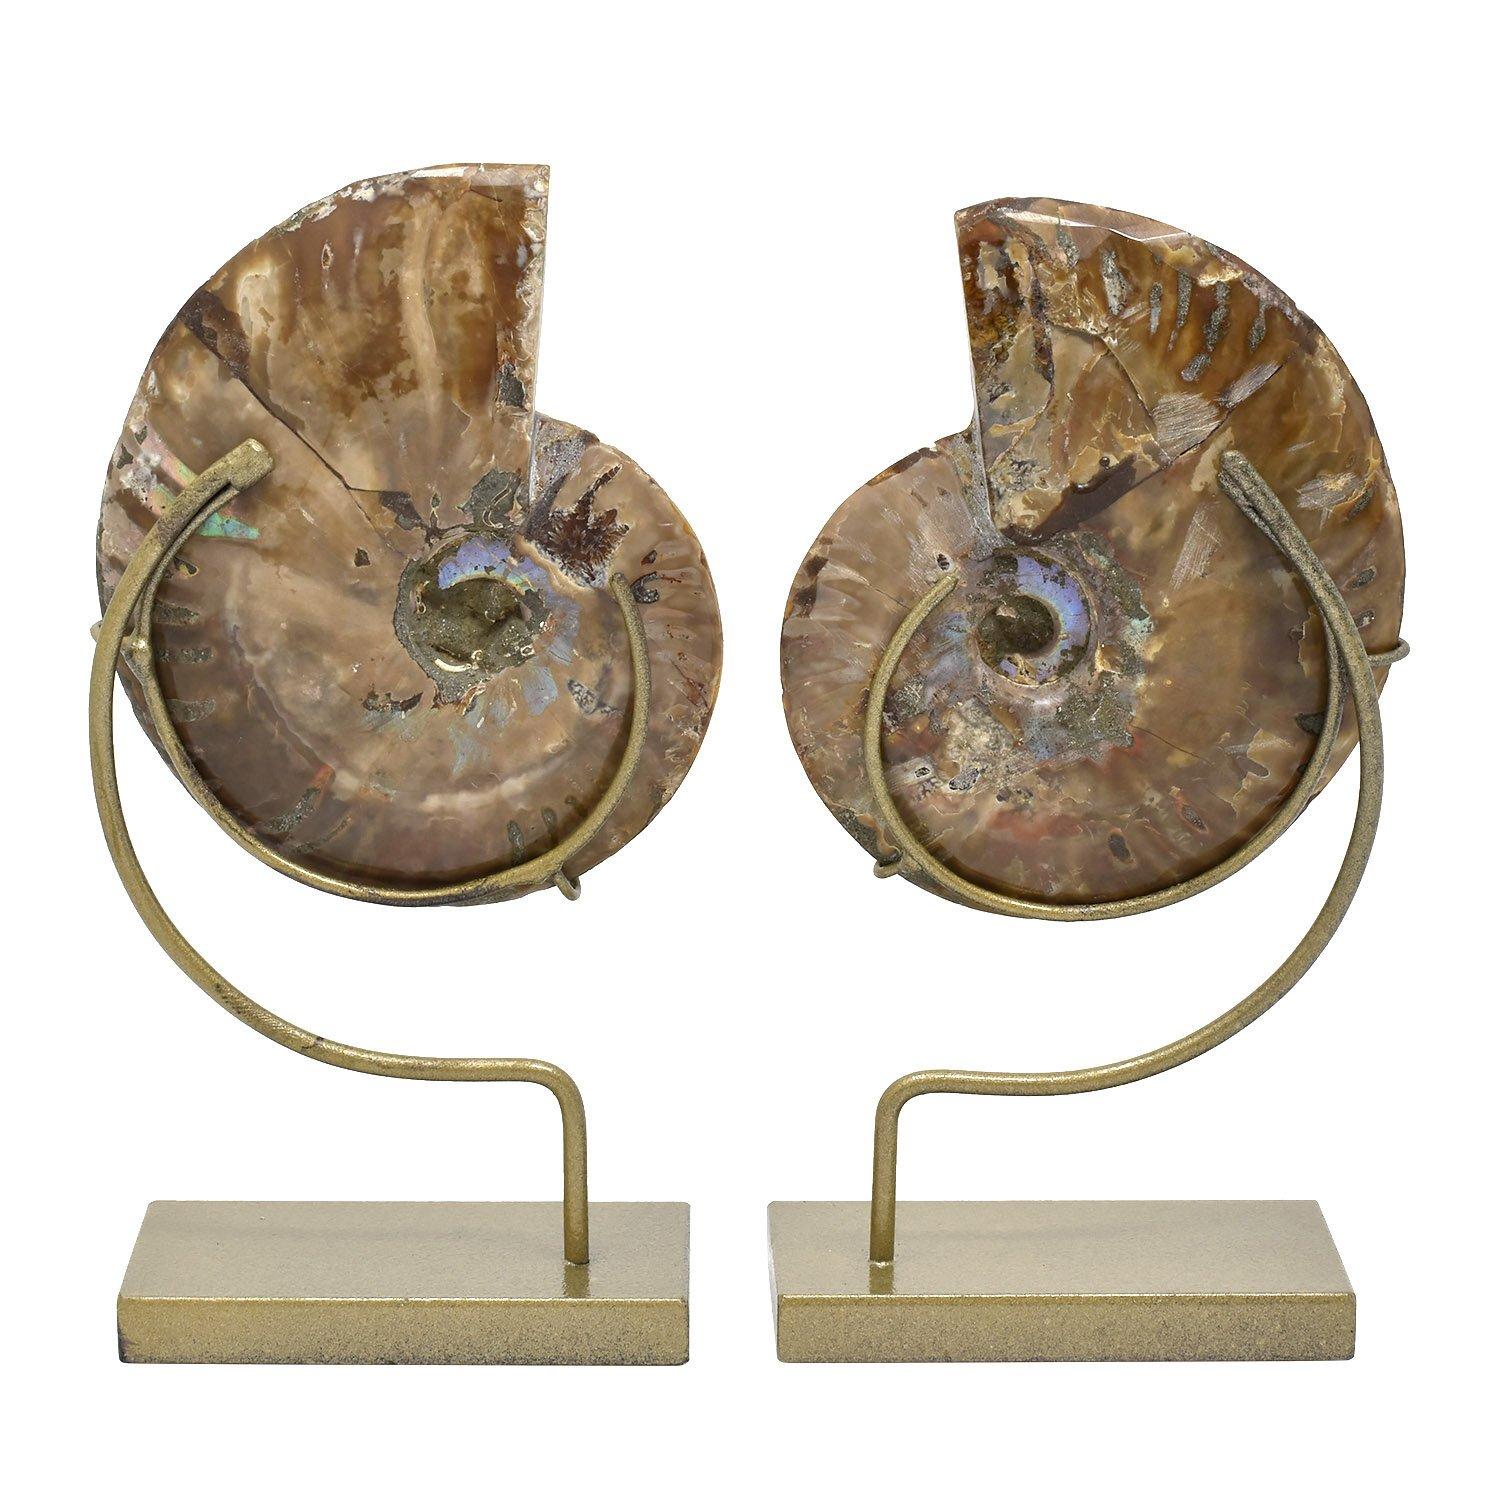 Malagasy Matched Pair Split Ammonite Fossil Set Mineral Specimen For Sale